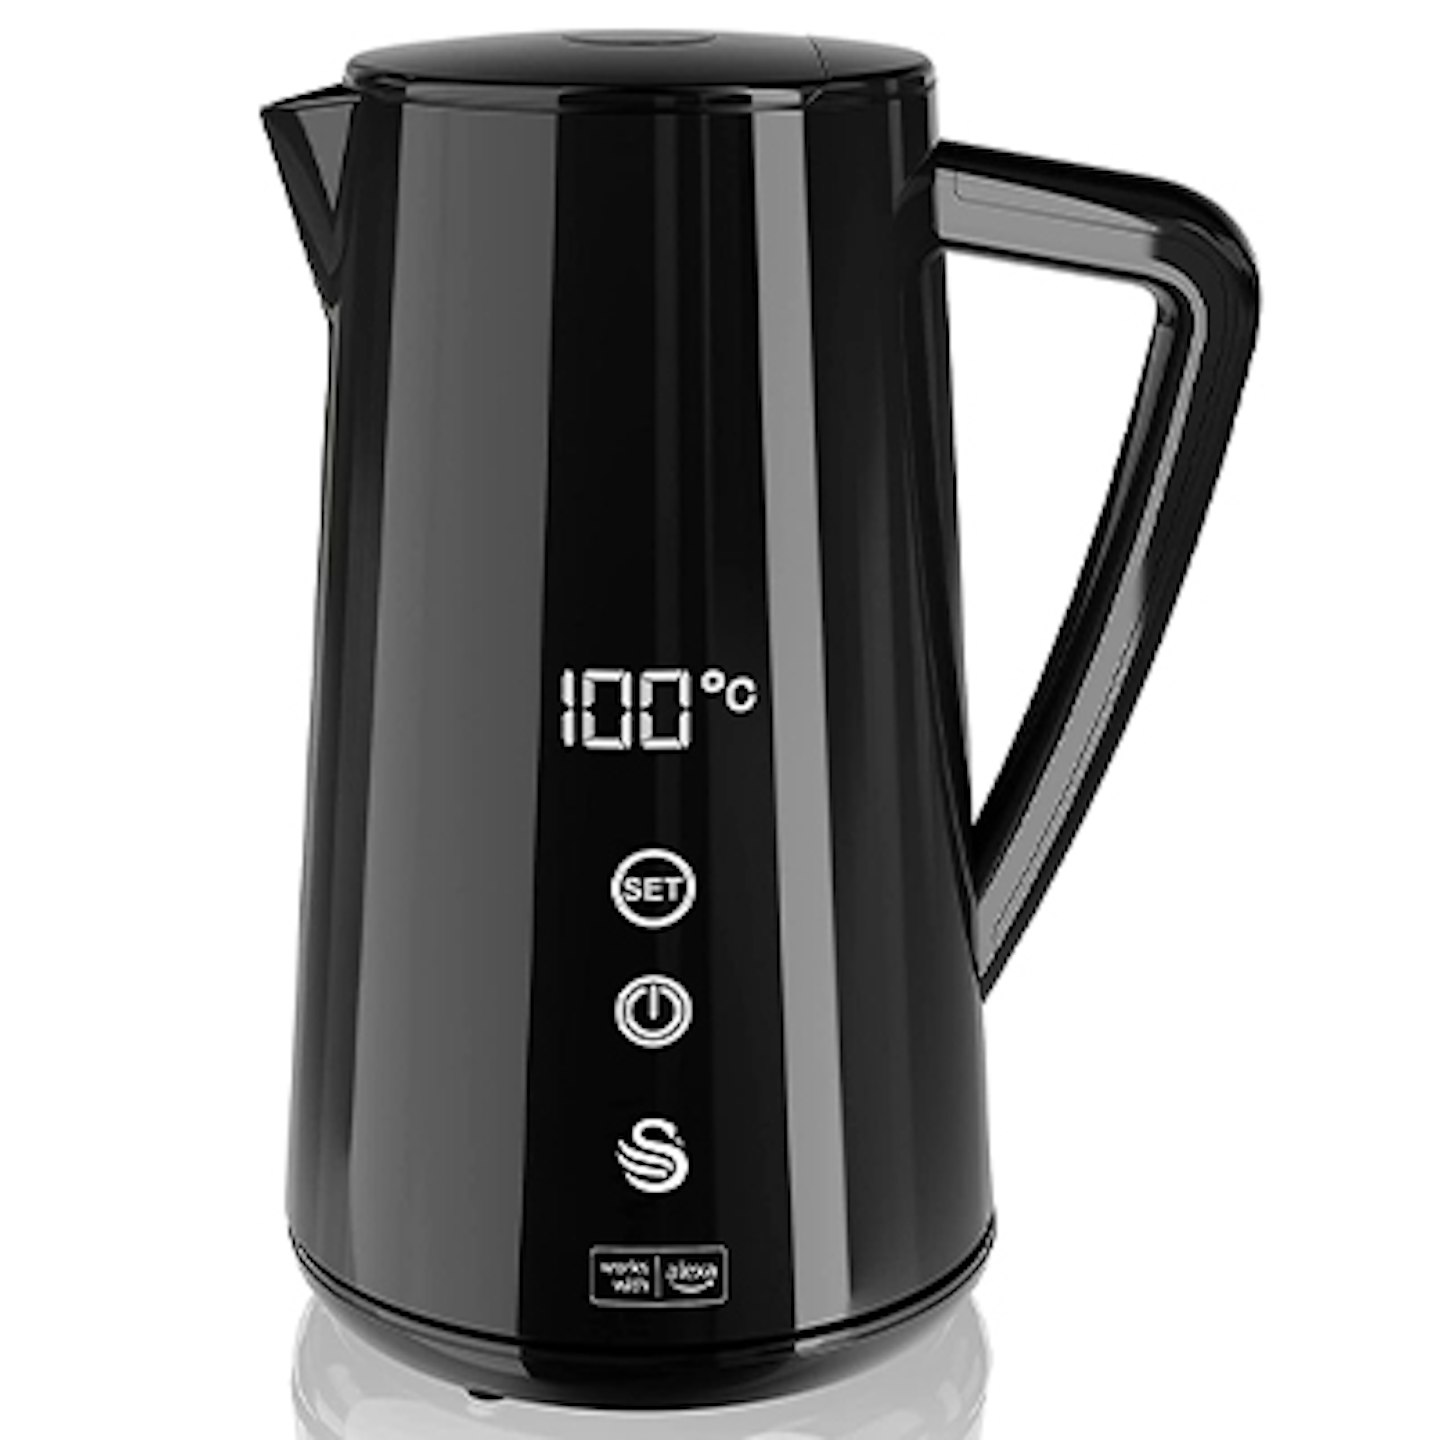 WeeKett Smart Wi-Fi Kettle Review: One of the best